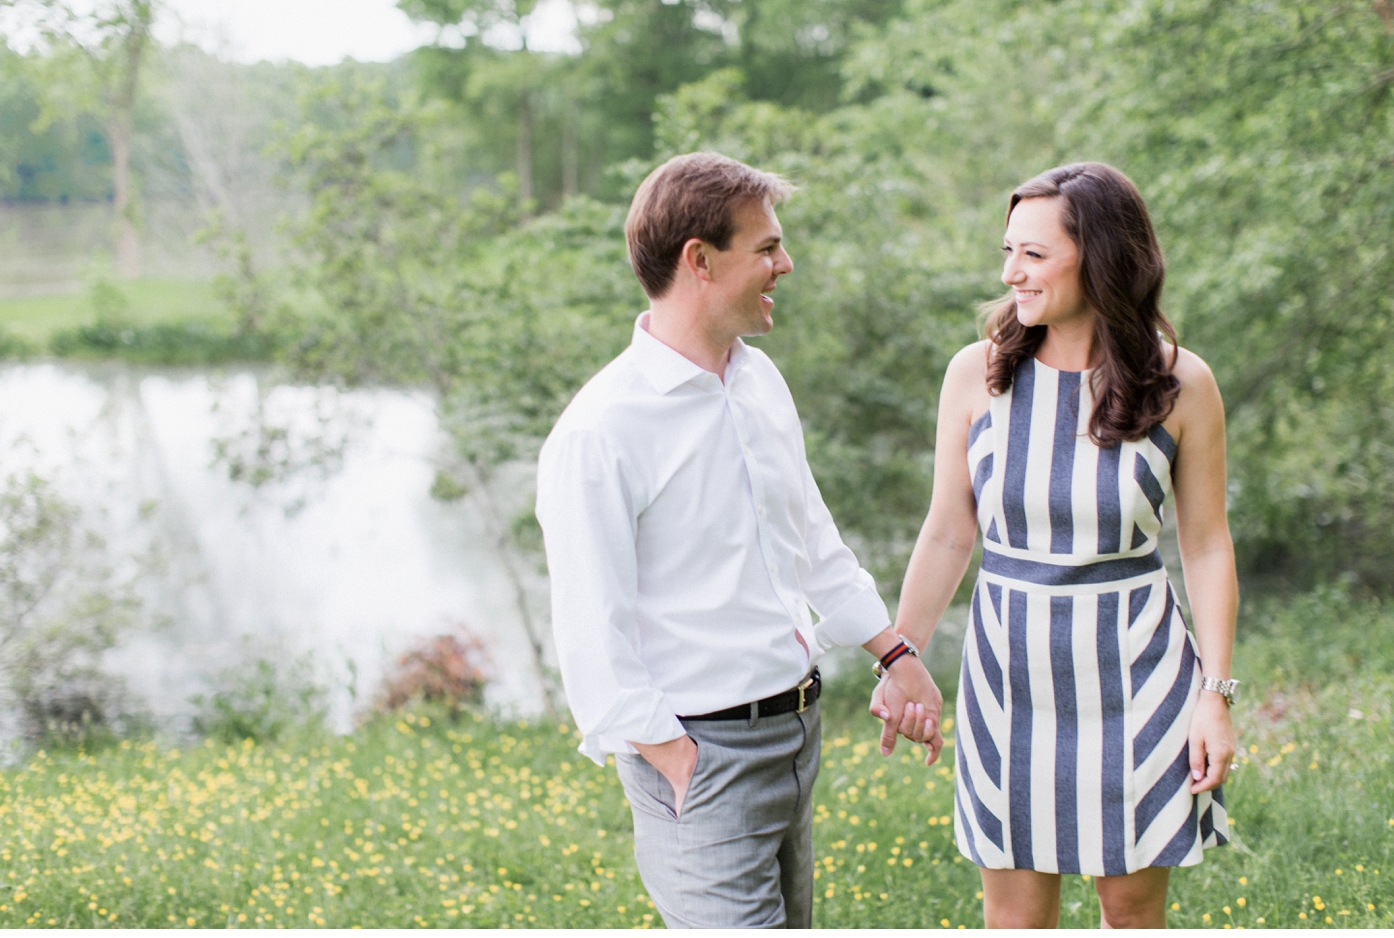 James River Engagement Session in Richmond, VA by Alisandra Photography